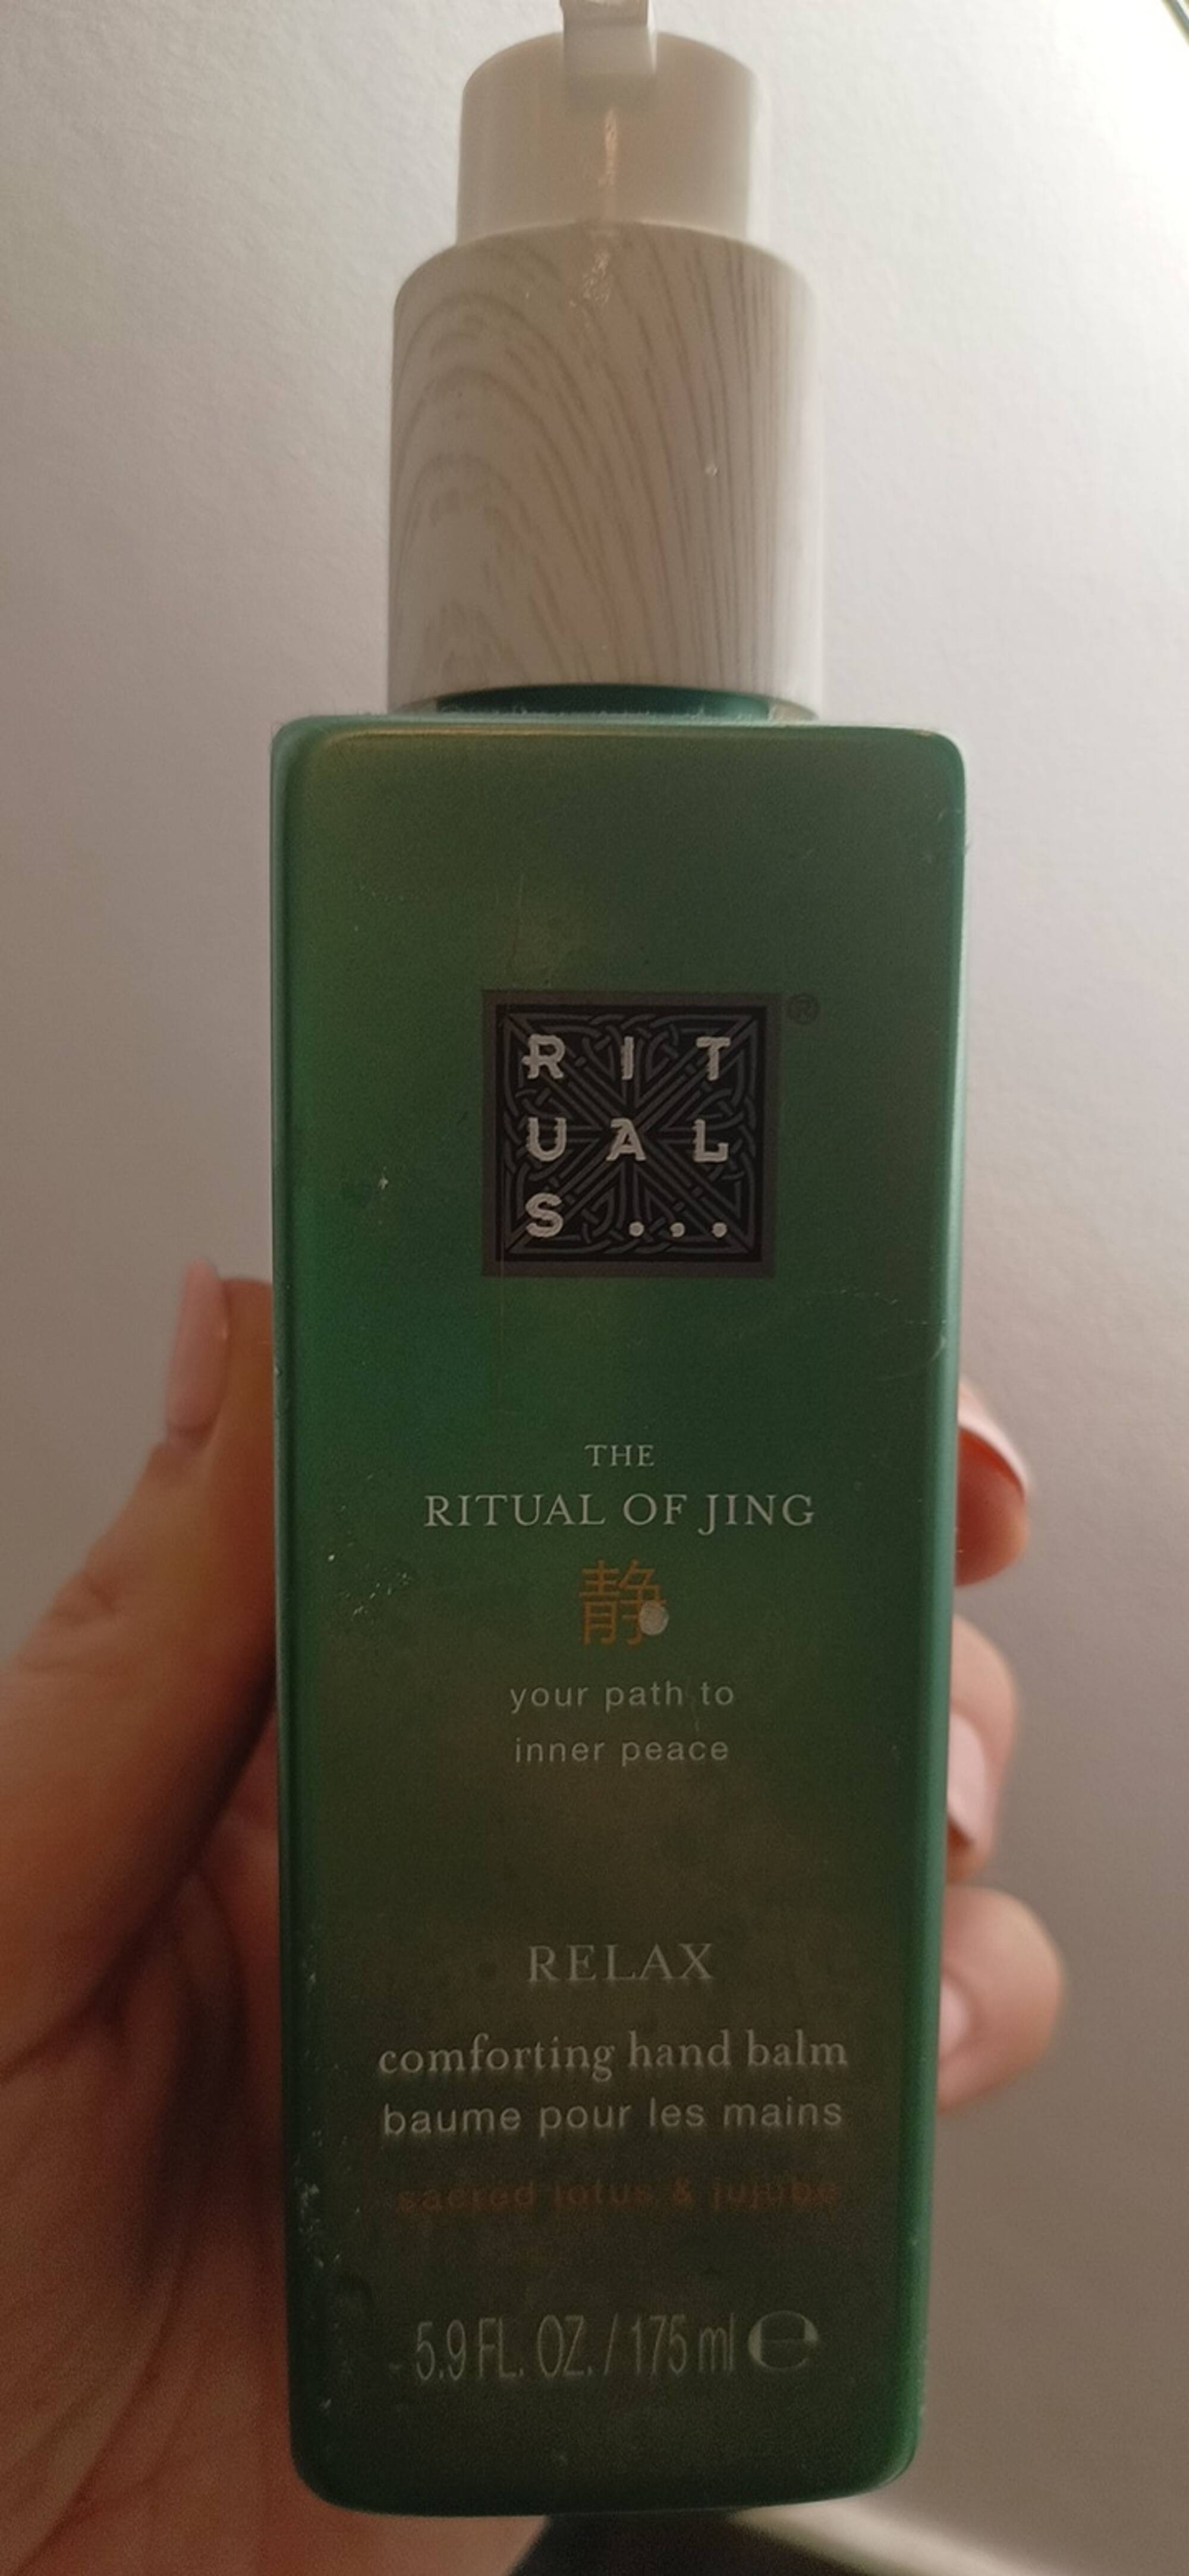 RITUALS - The ritual of jing - Baume pour les mains